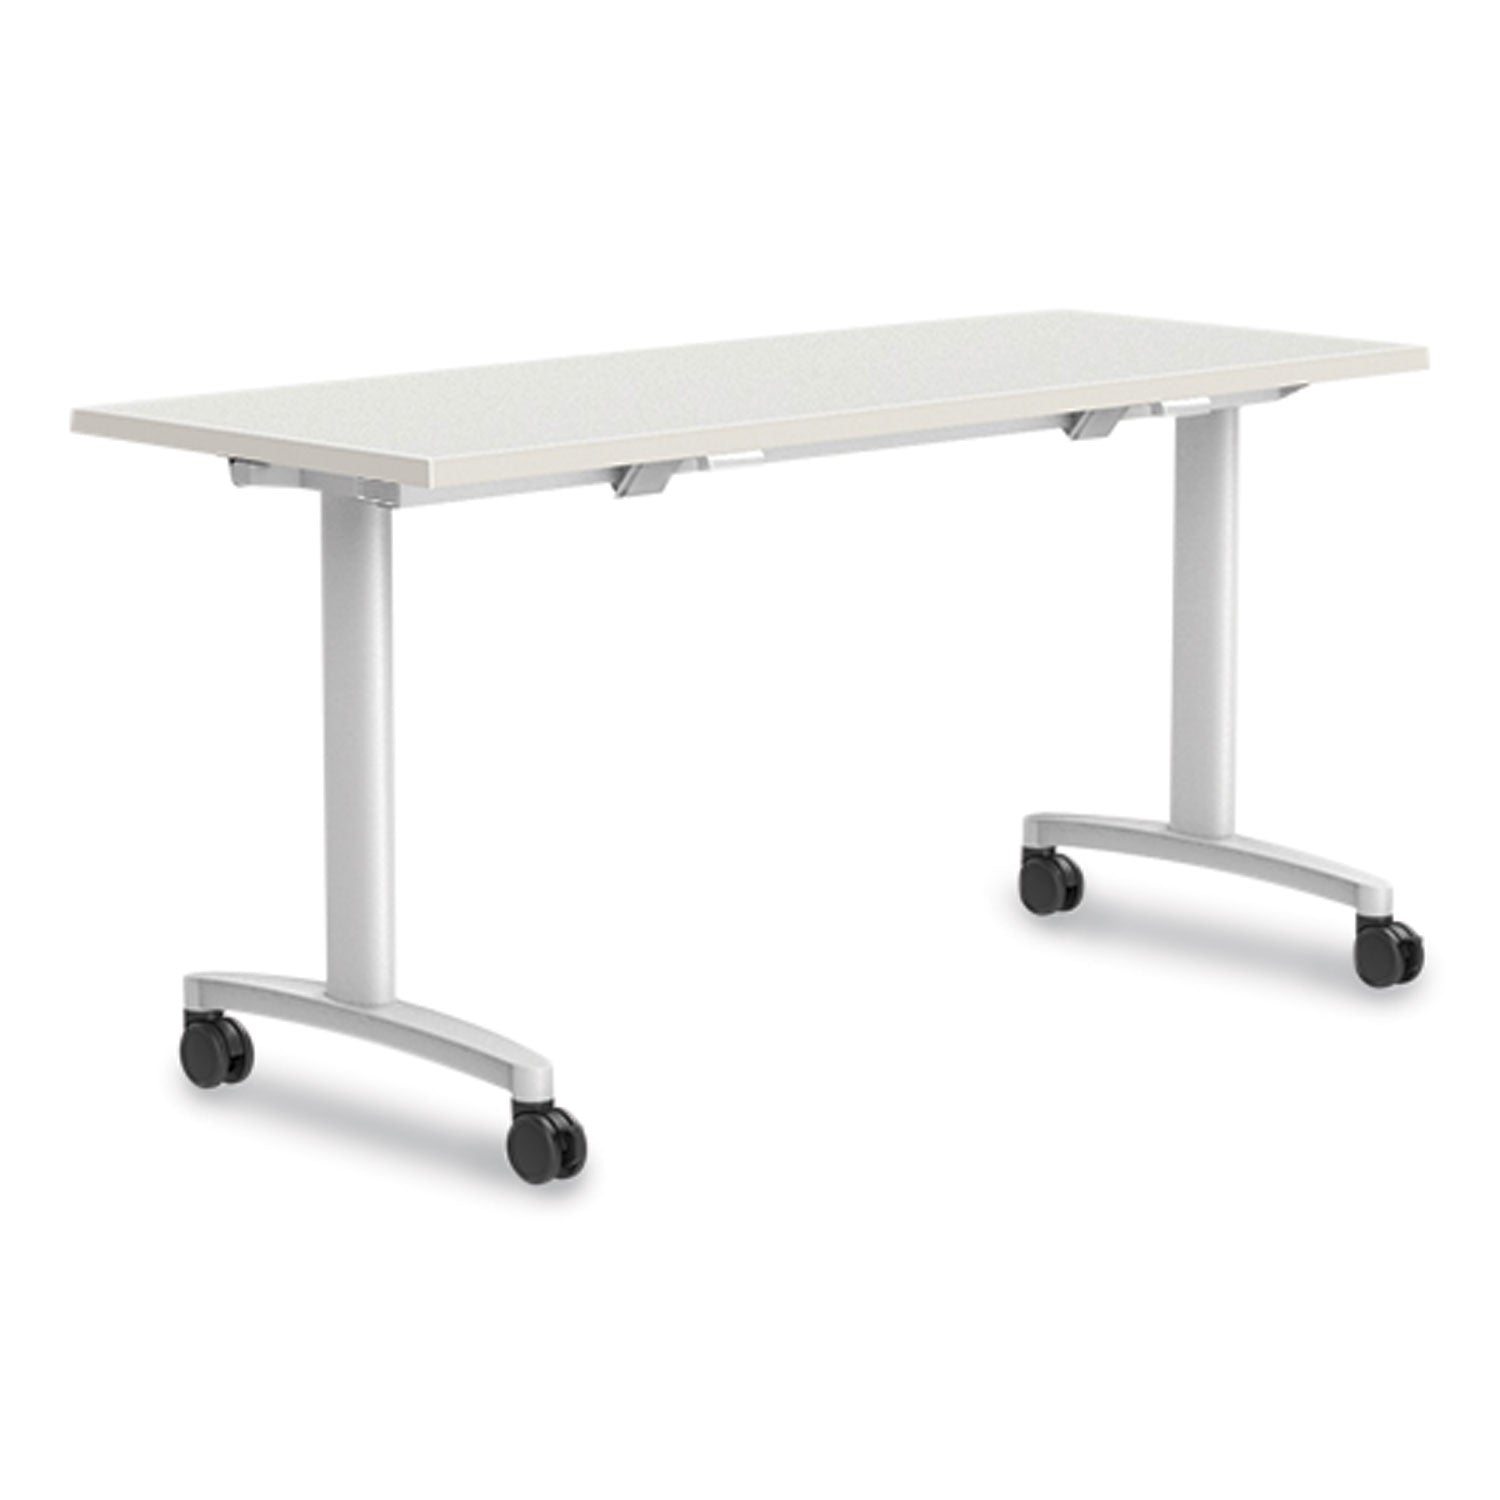 workplace20-nesting-training-table-rectangular-60w-x-24d-x-295h-silver-mesh_uos24393616 - 1